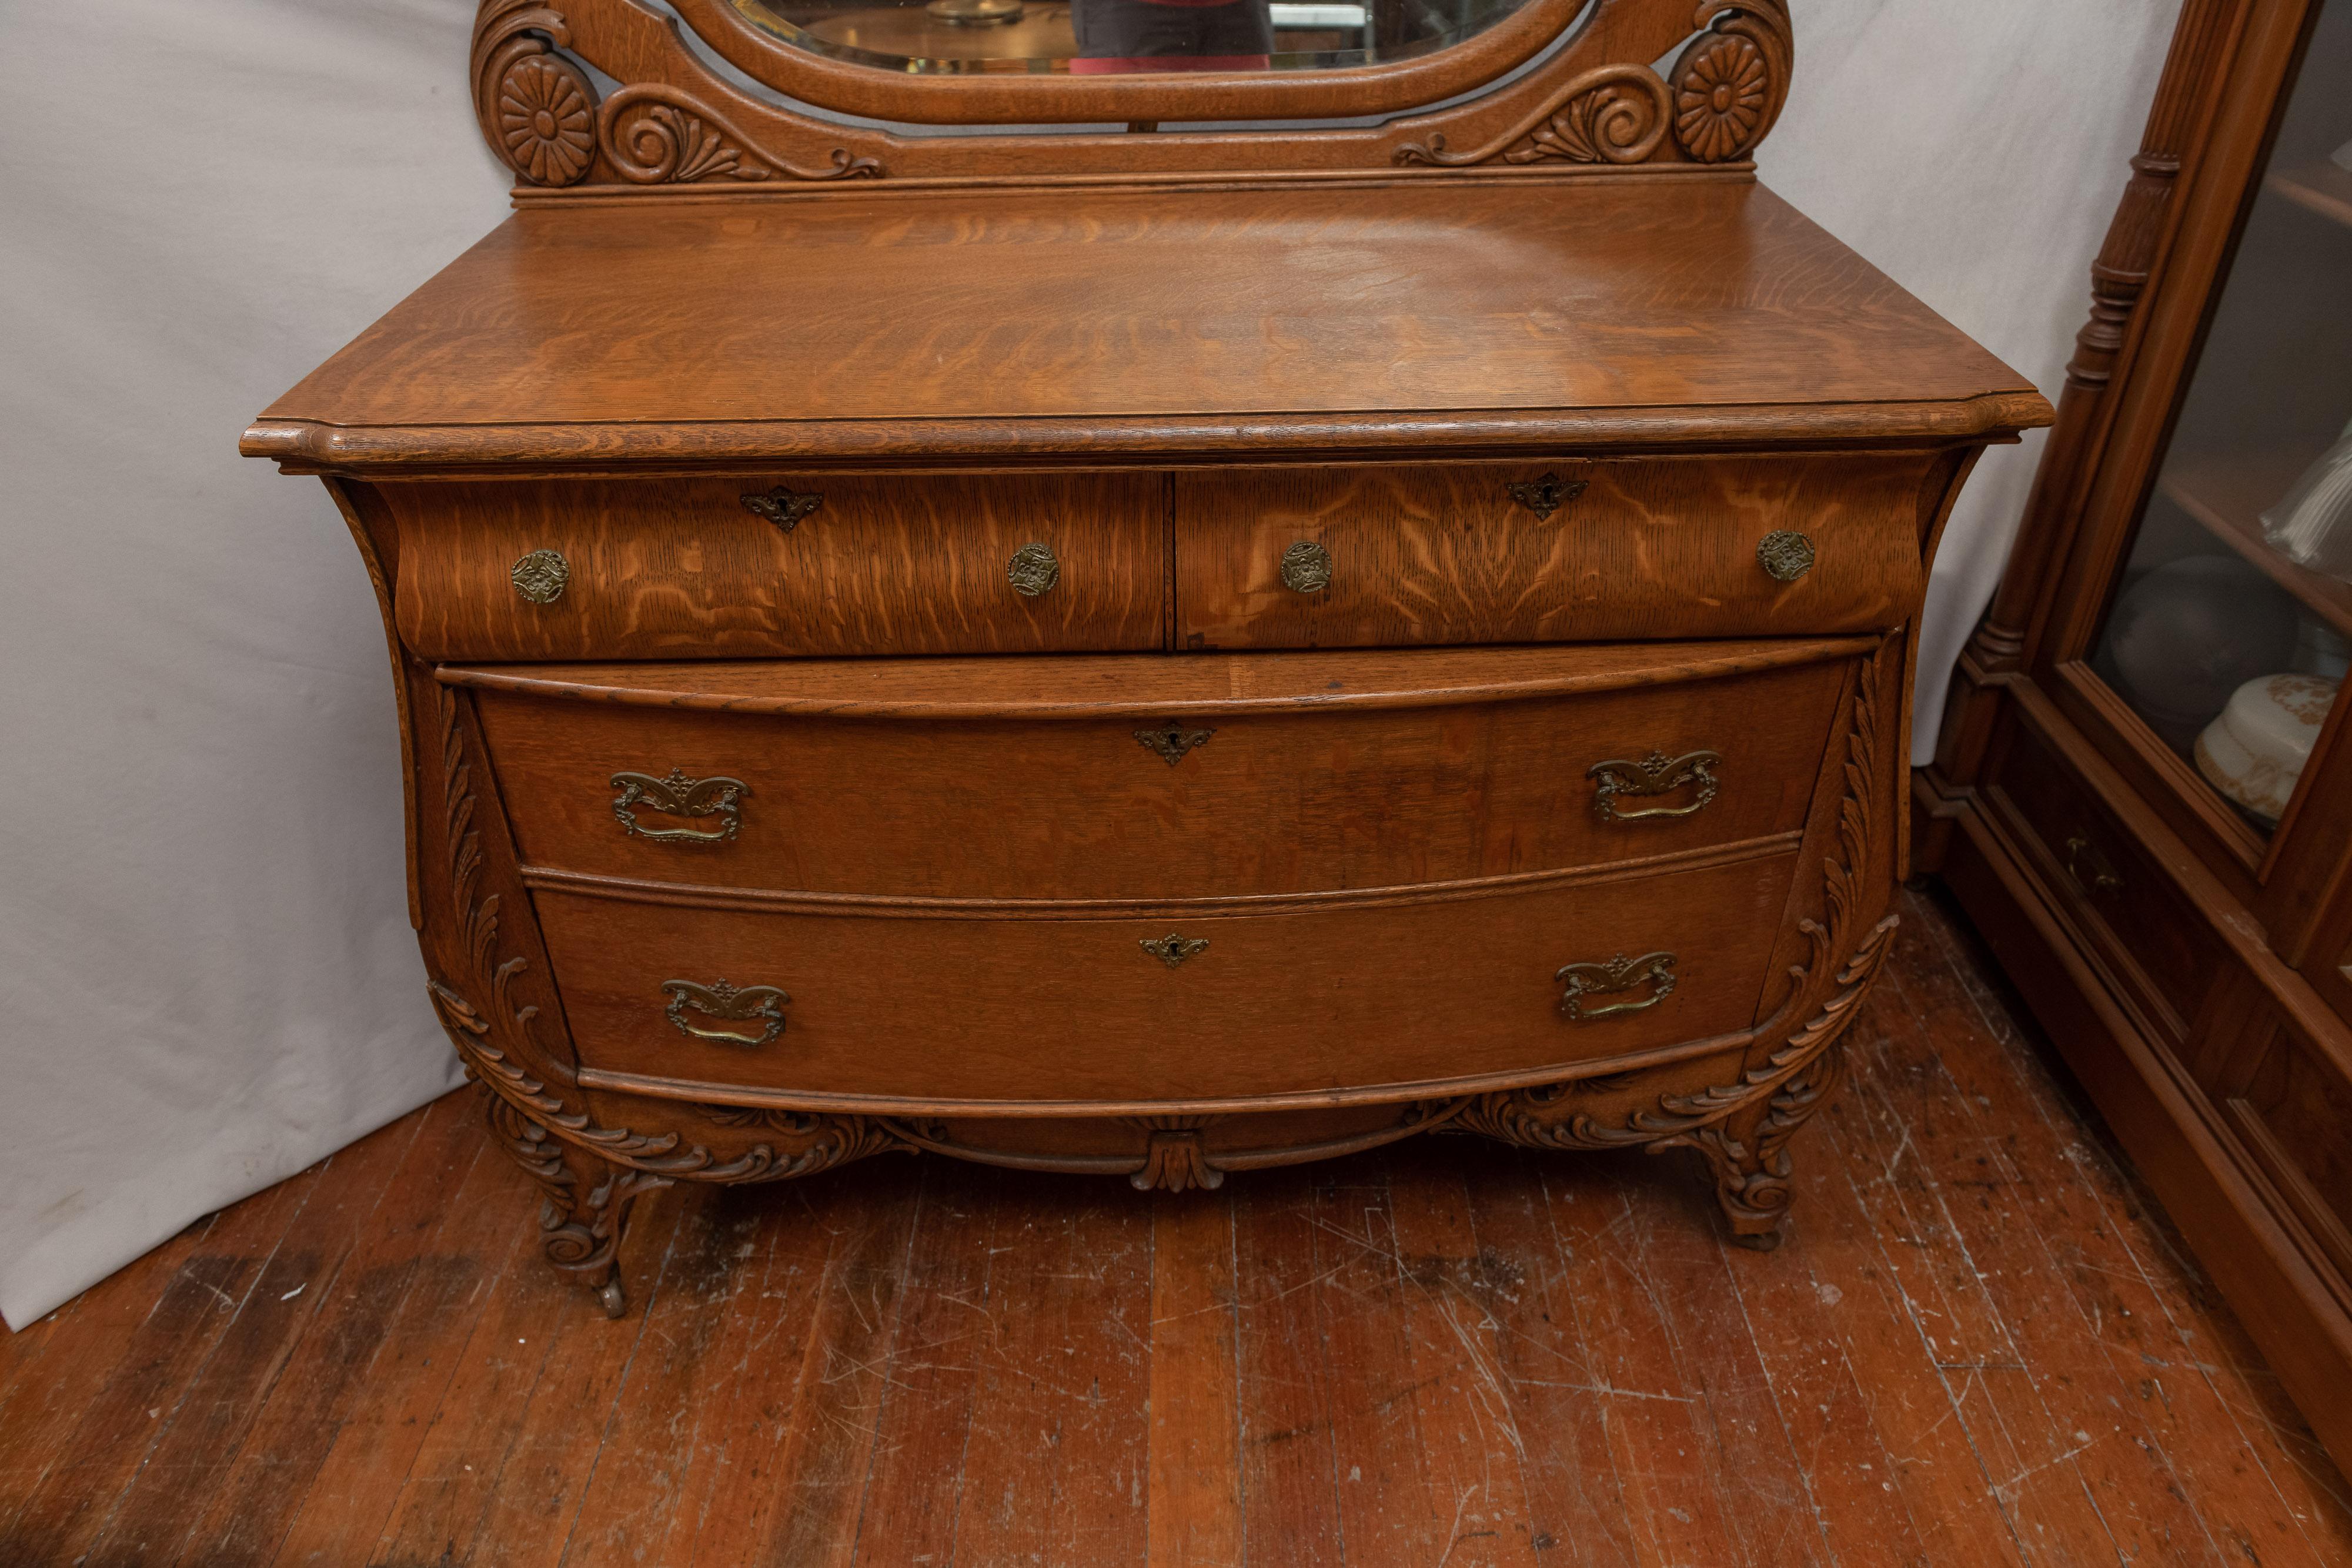 This incredible oak dresser, or bureau if you prefer, is top of the line oak, circa 1900. The box front drawers, bombe (curved) sides, big beveled shield shape mirror and original brass pulls are what makes this an exceptional example of turn of the